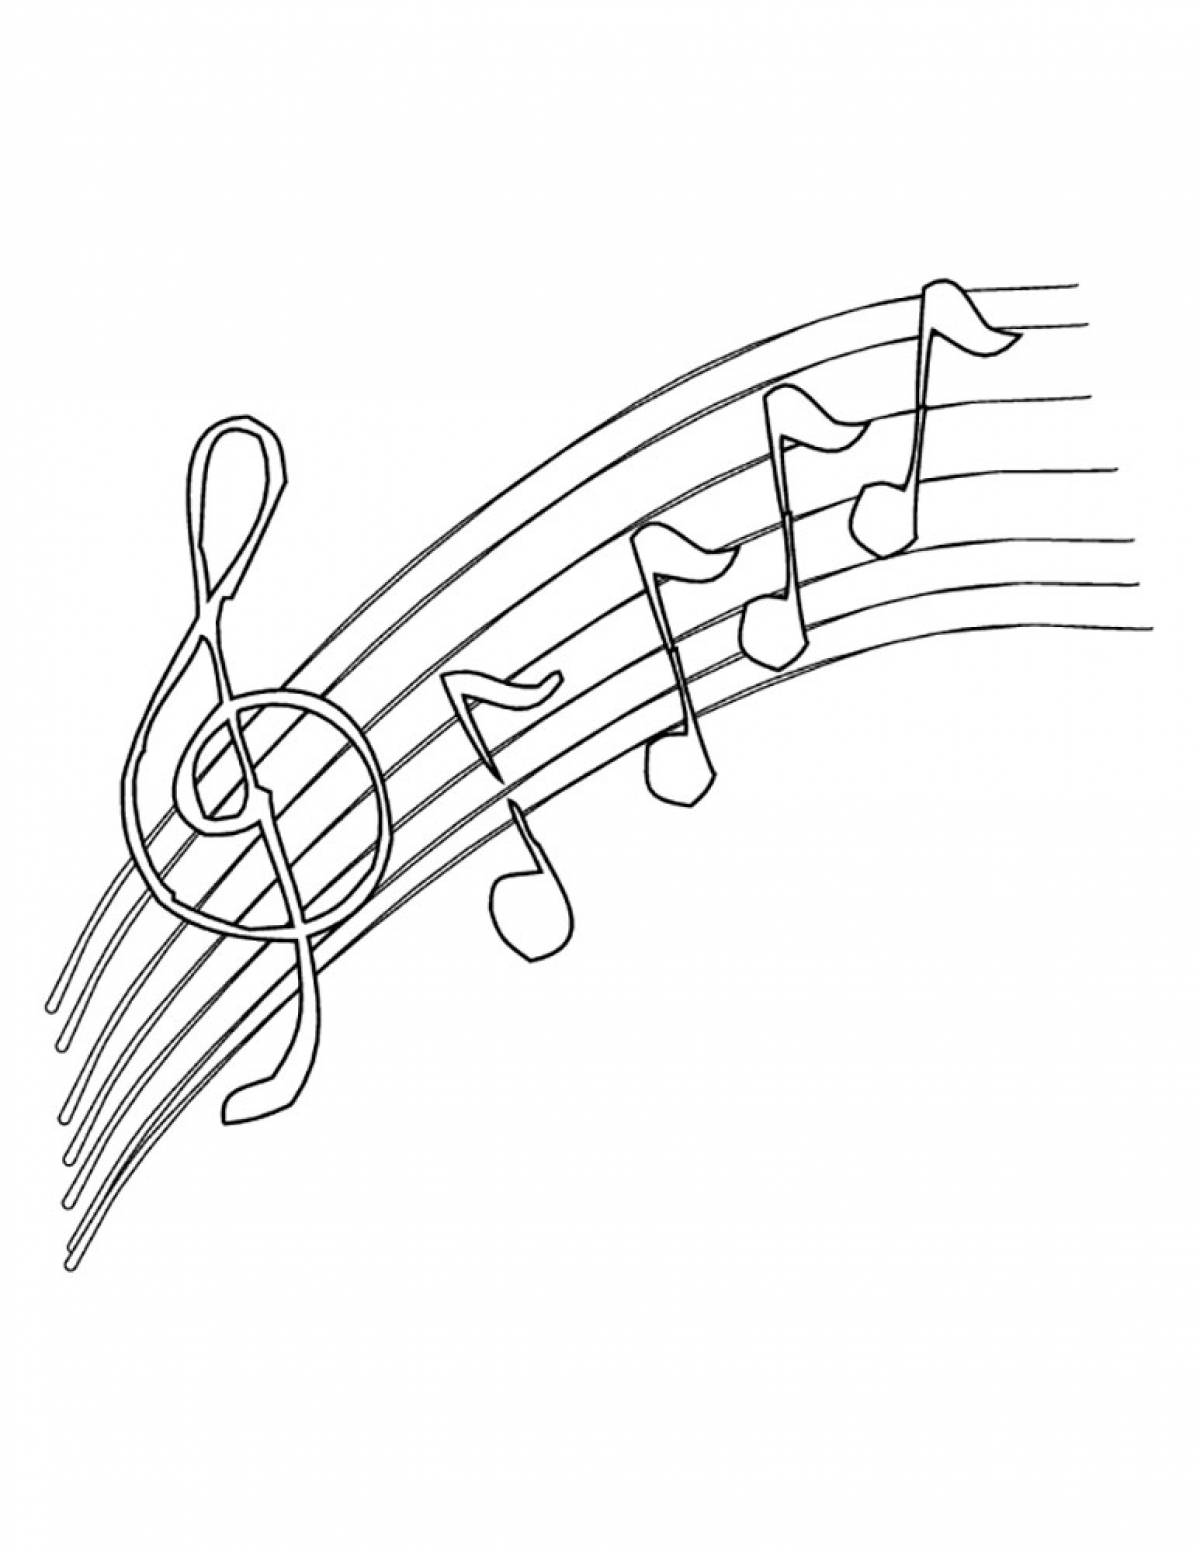 Music note drawing